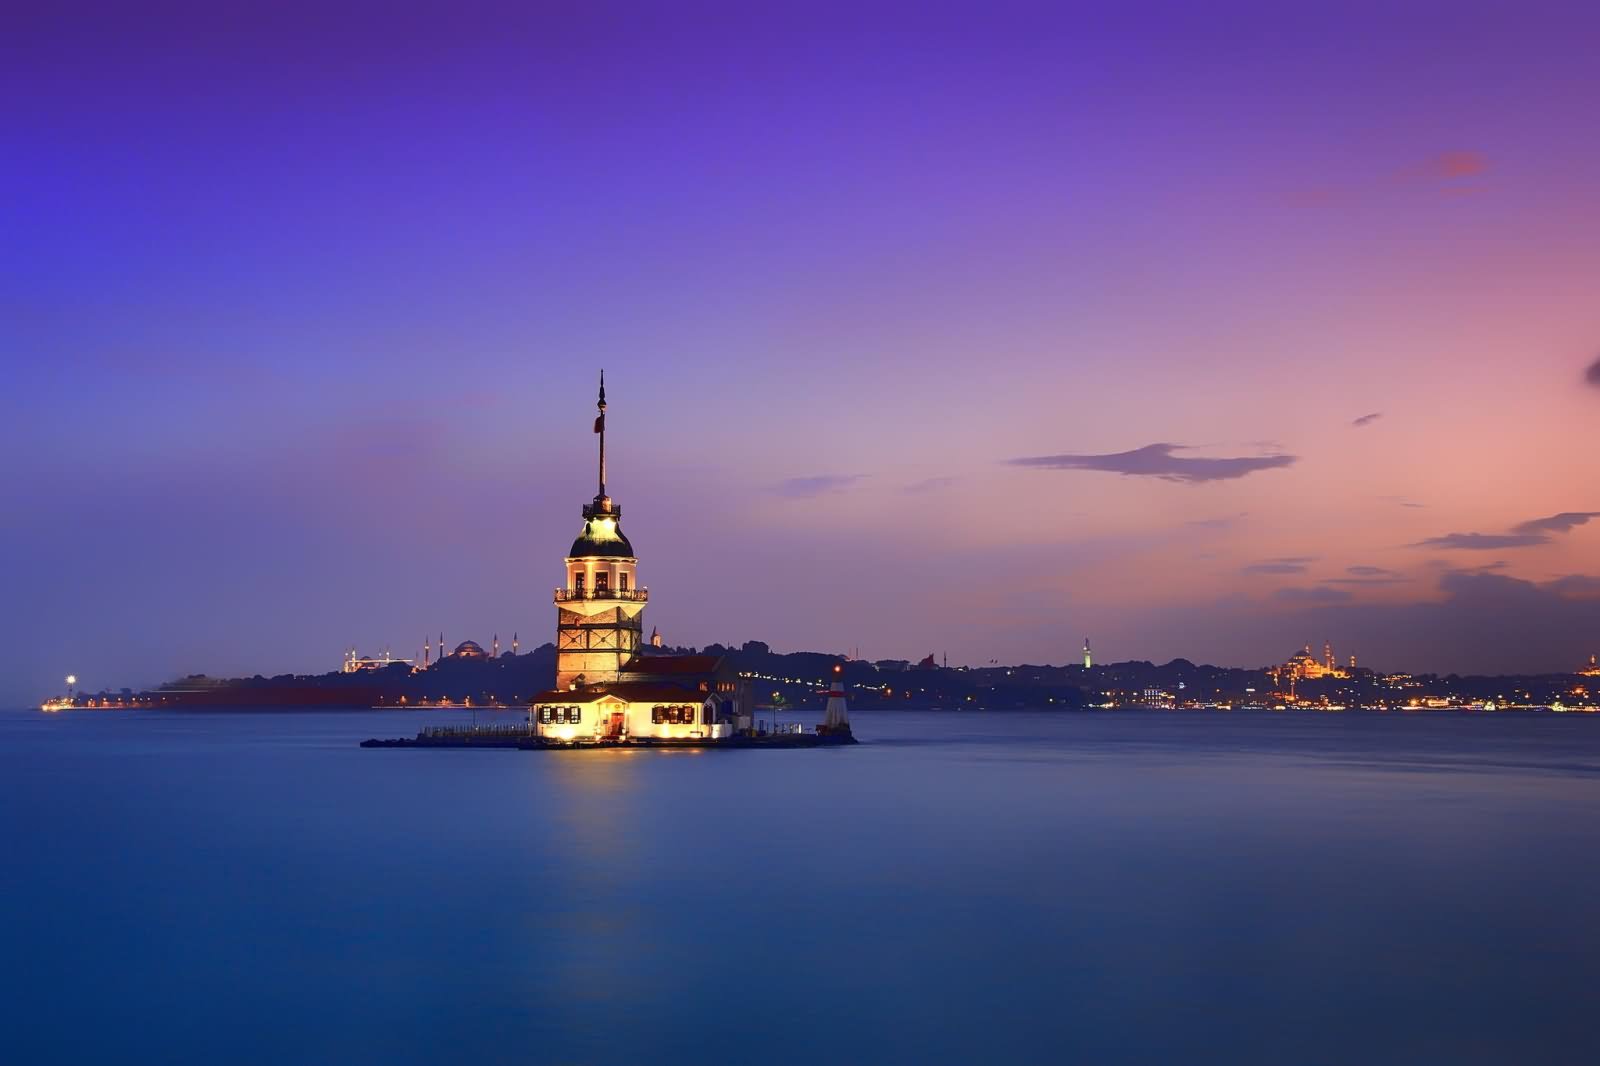 The Maiden's Tower Lit Up At Night